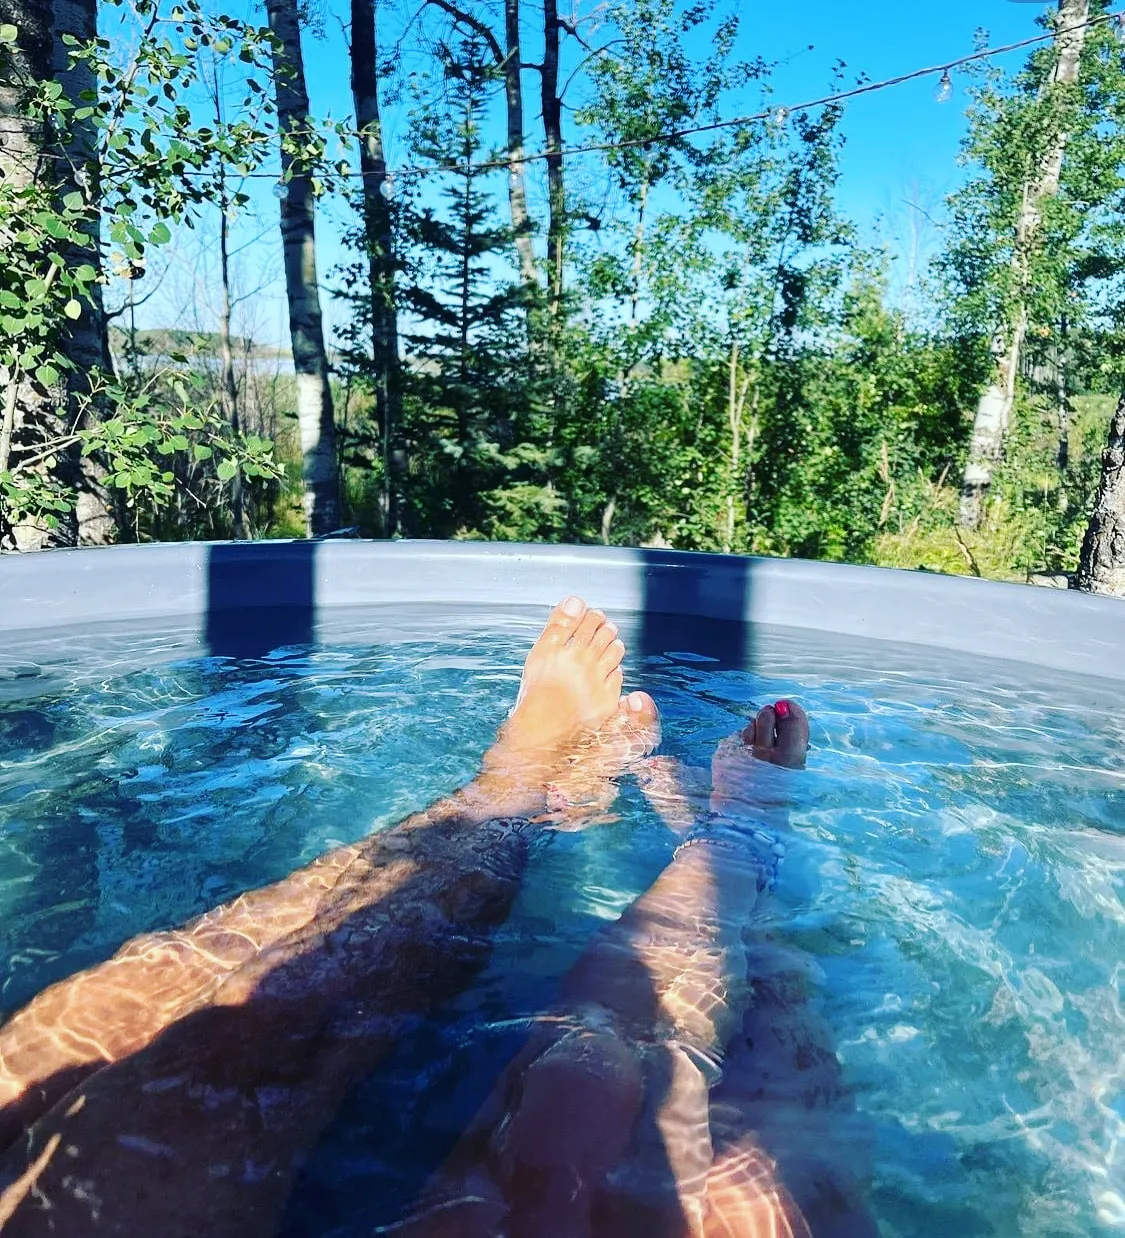 A couple's legs and feet sitting inside the outdoor hot tub having a relaxing time during the summer with forest views